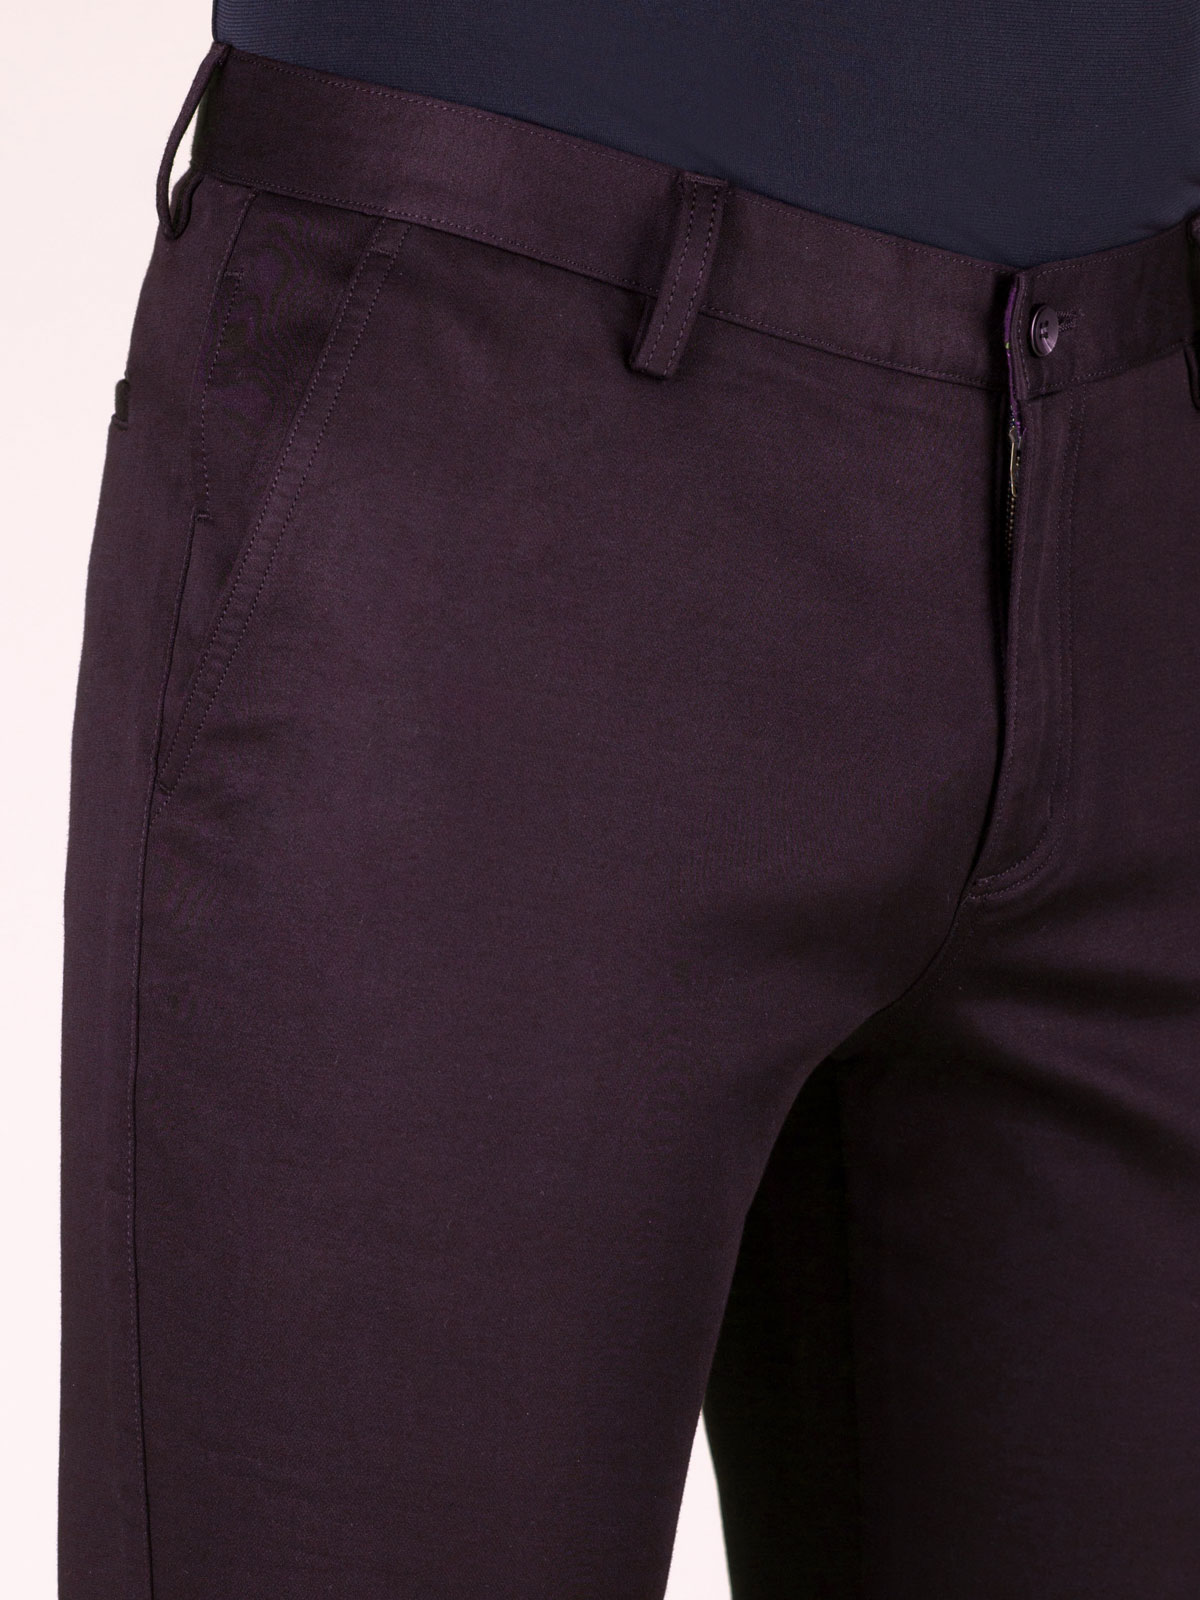 Dark Purple Solid Trousers - Selling Fast at Pantaloons.com